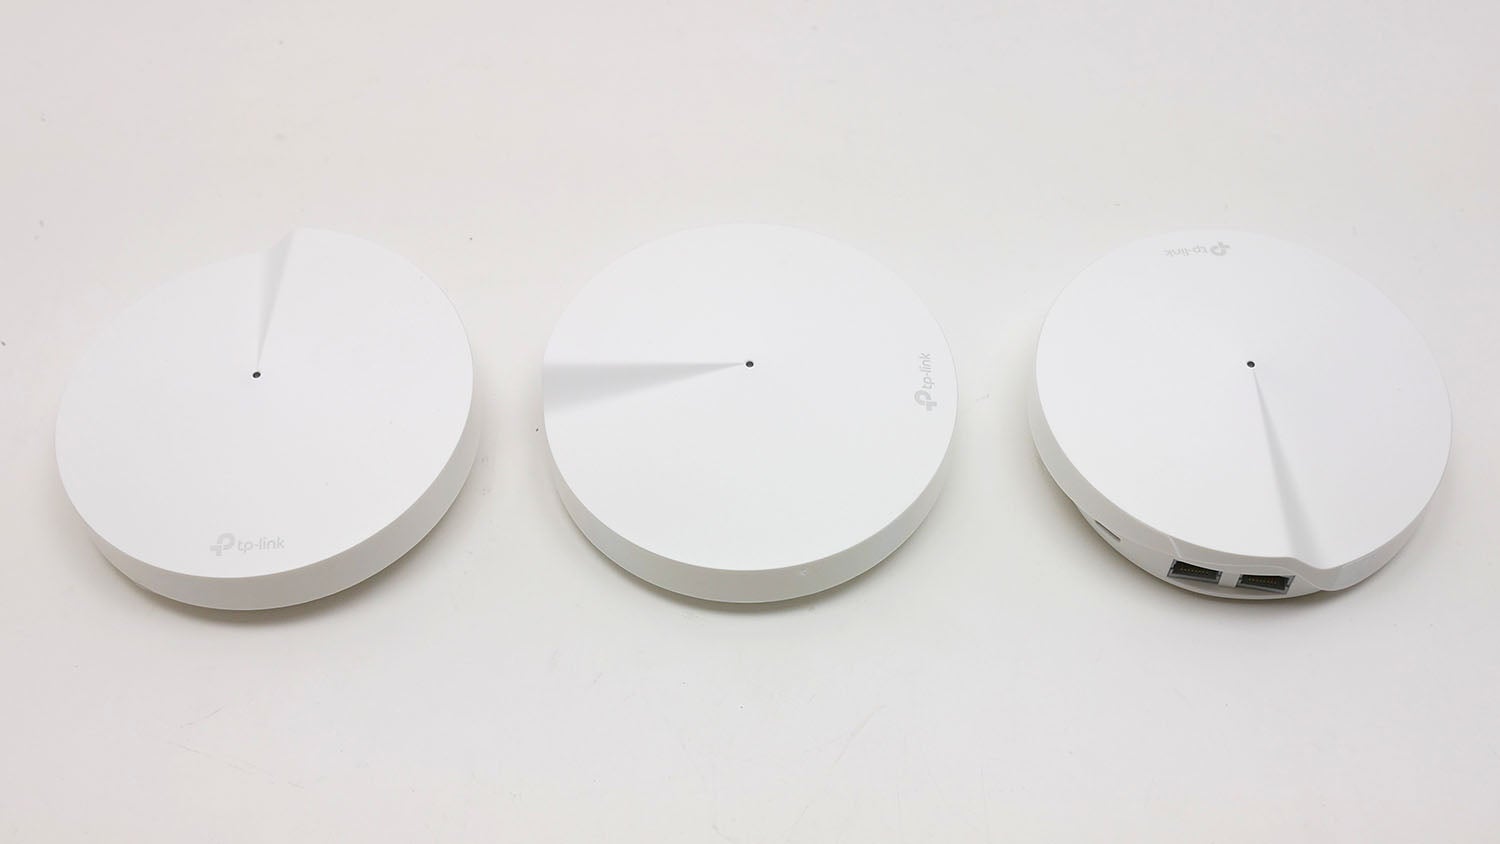 Three TP-Link Deco mesh Wi-Fi units on a white surface.